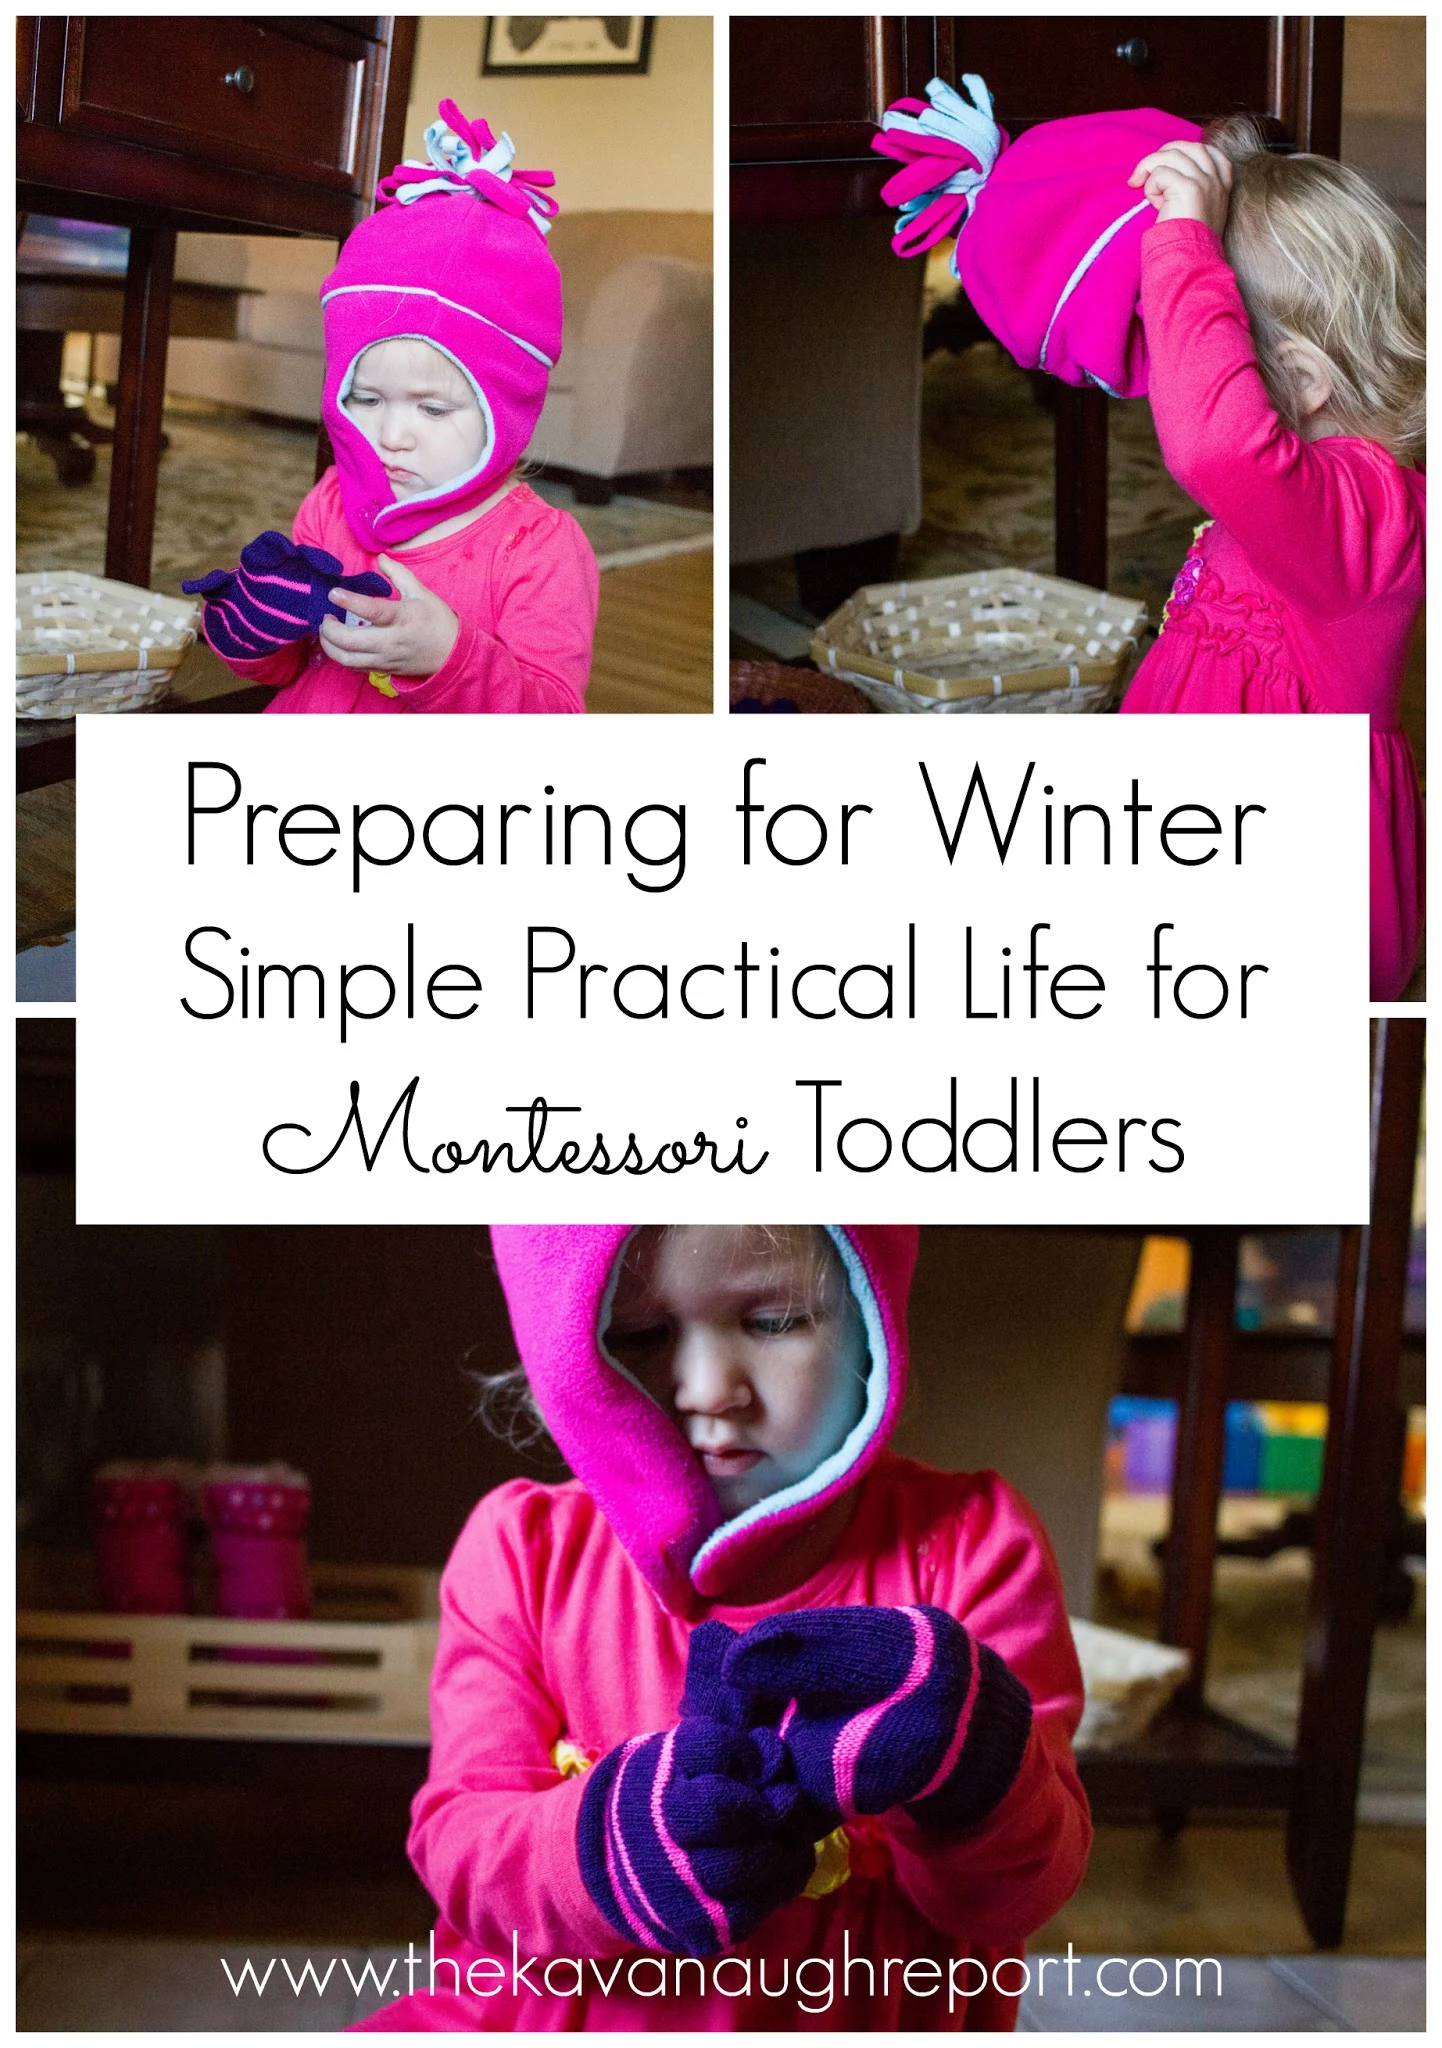 Montessori friendly tips for preparing for winter with your toddler.